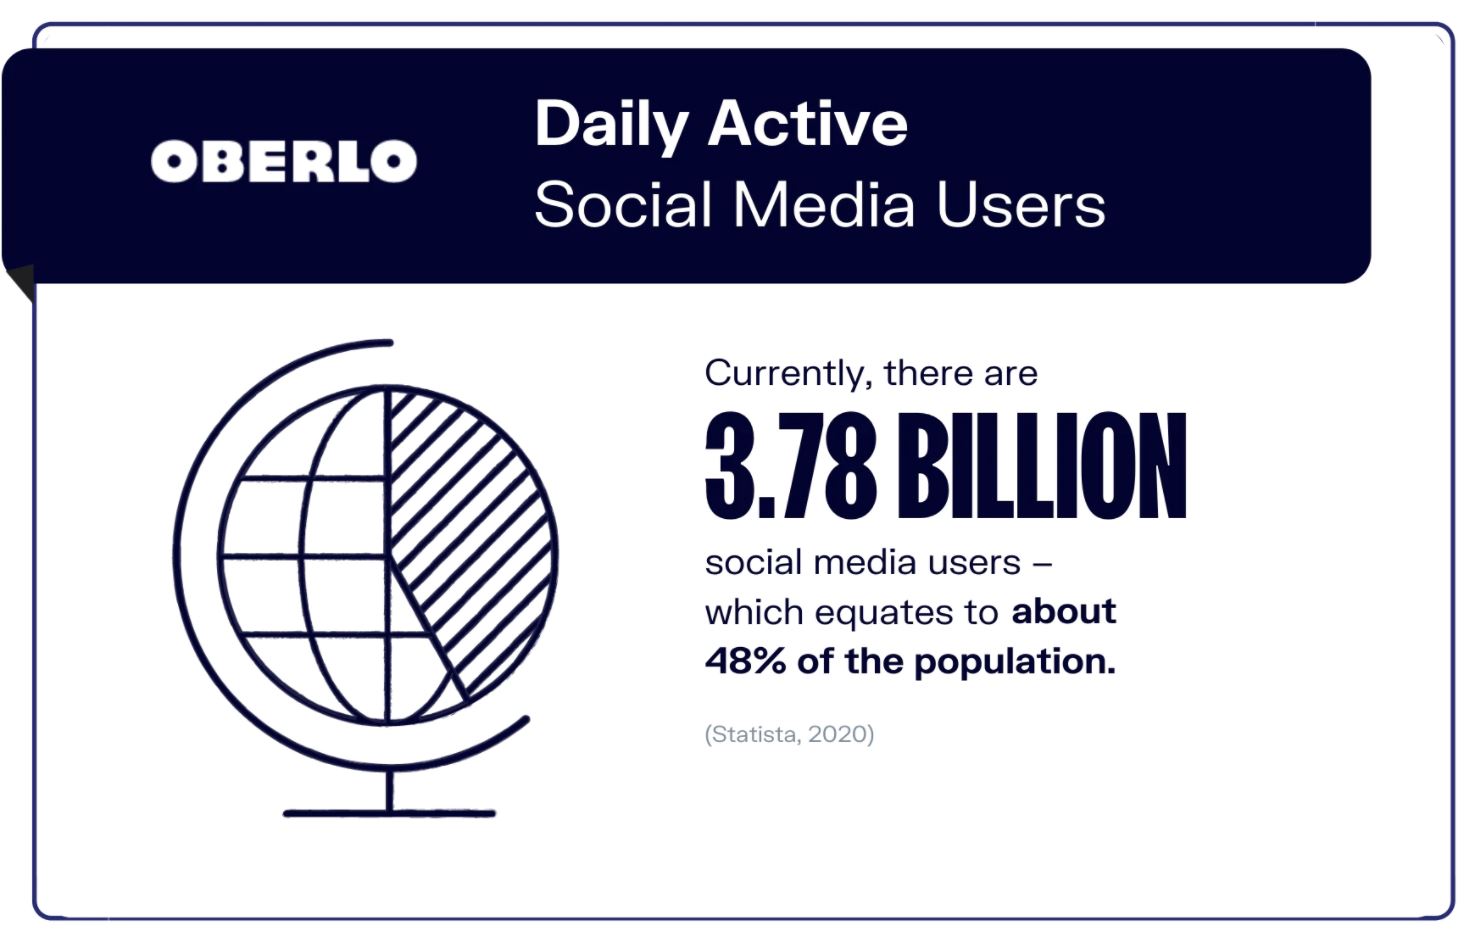 There are 3.78 billion daily active social media users globally (Source: Oberlo)